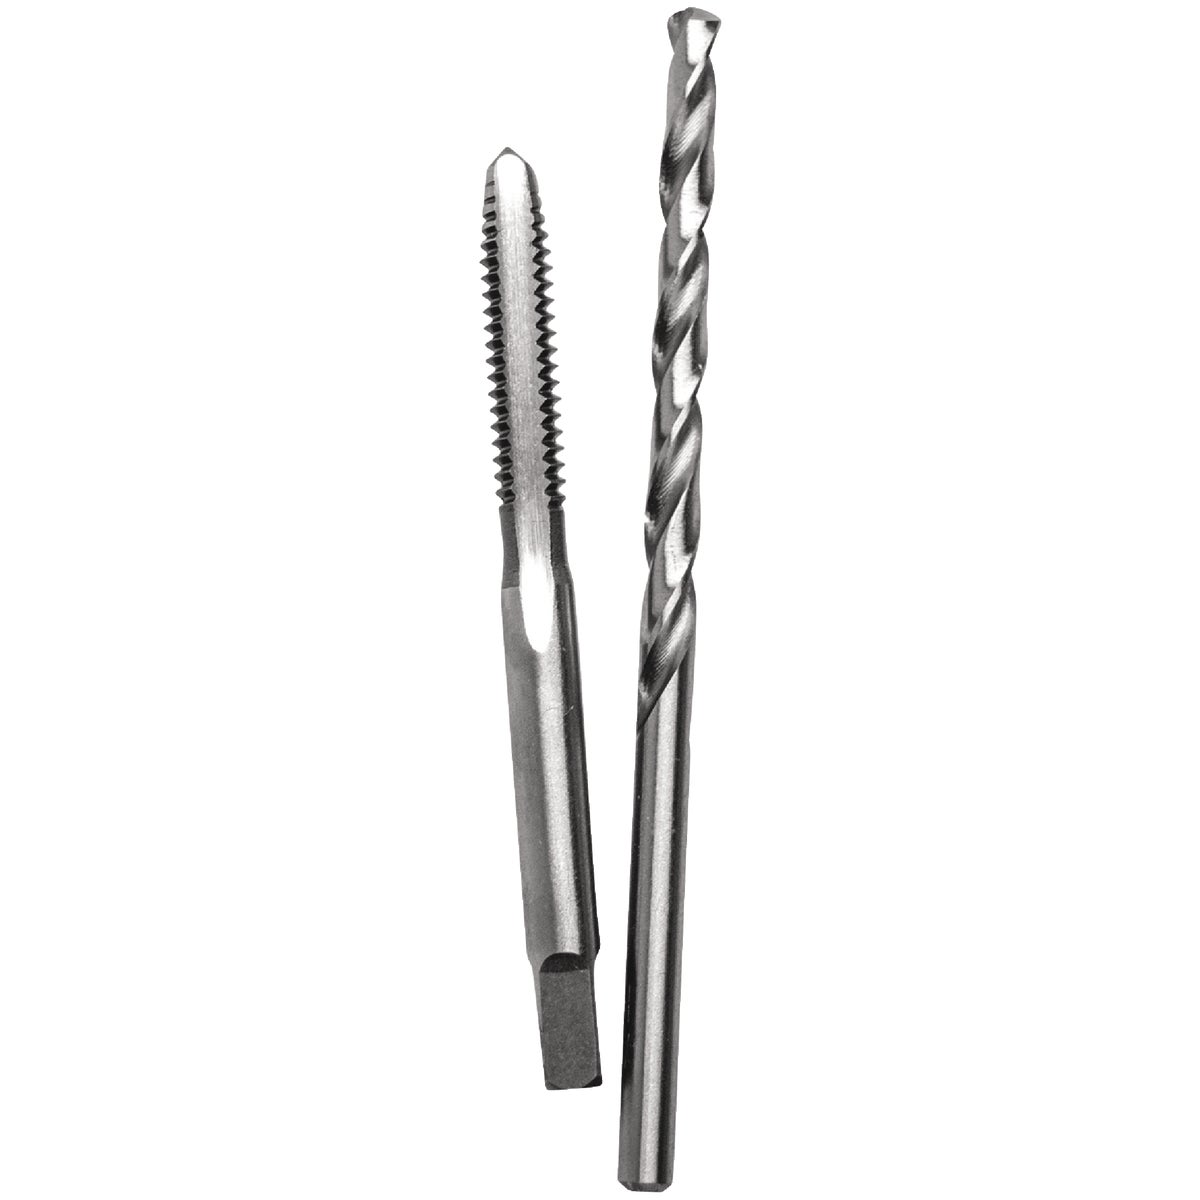 Century Drill & Tool 7/16-14 National Coarse Plug Carbon Steel Tap & 3/8 In. Brite Drill Bit Combo Pack